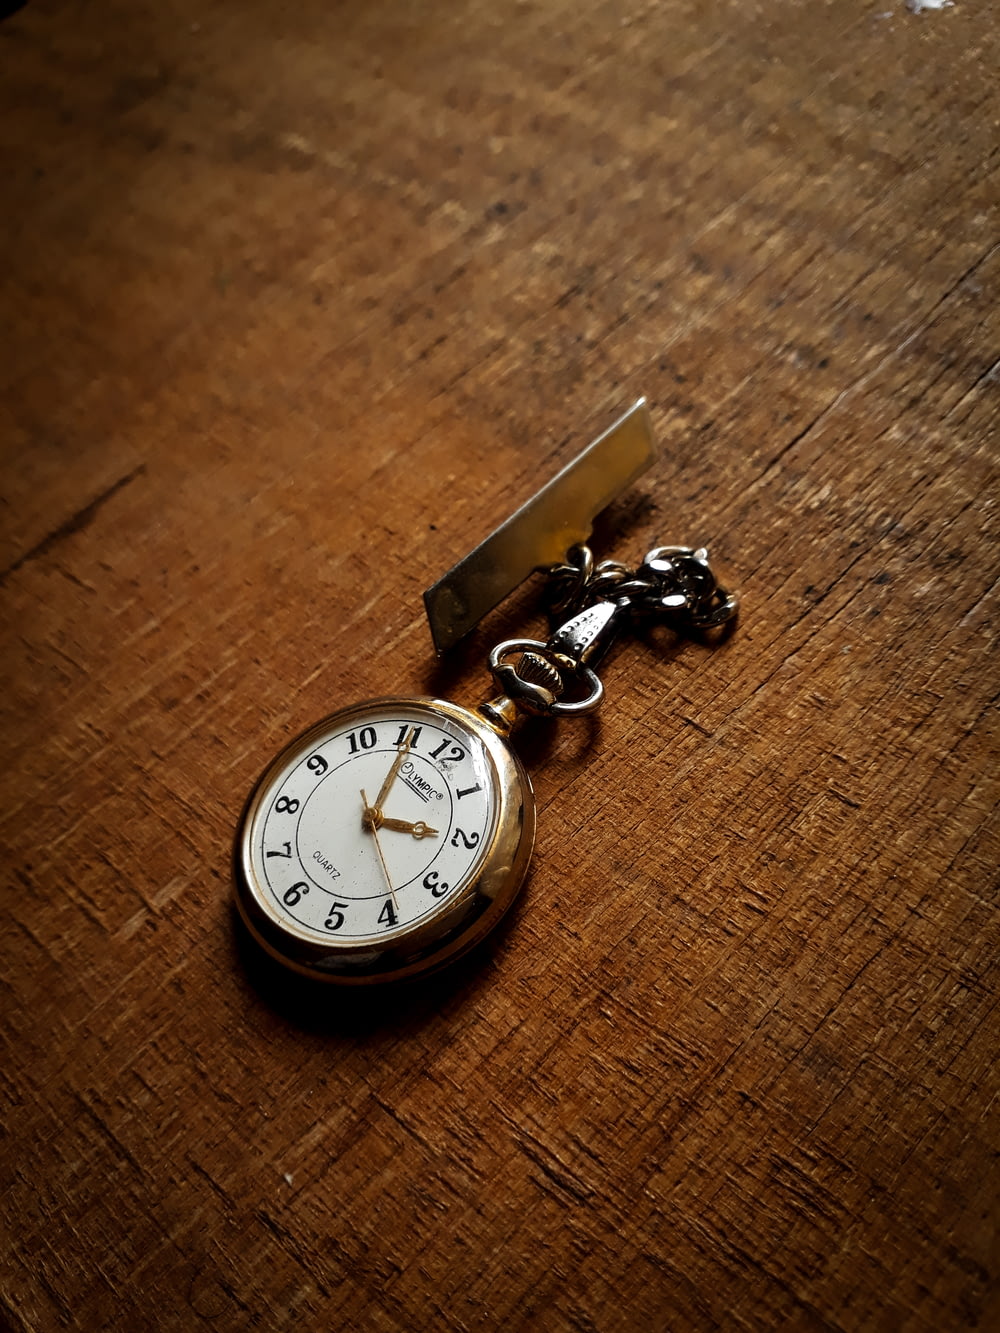 round gold-colored pocketwatch at 2:55